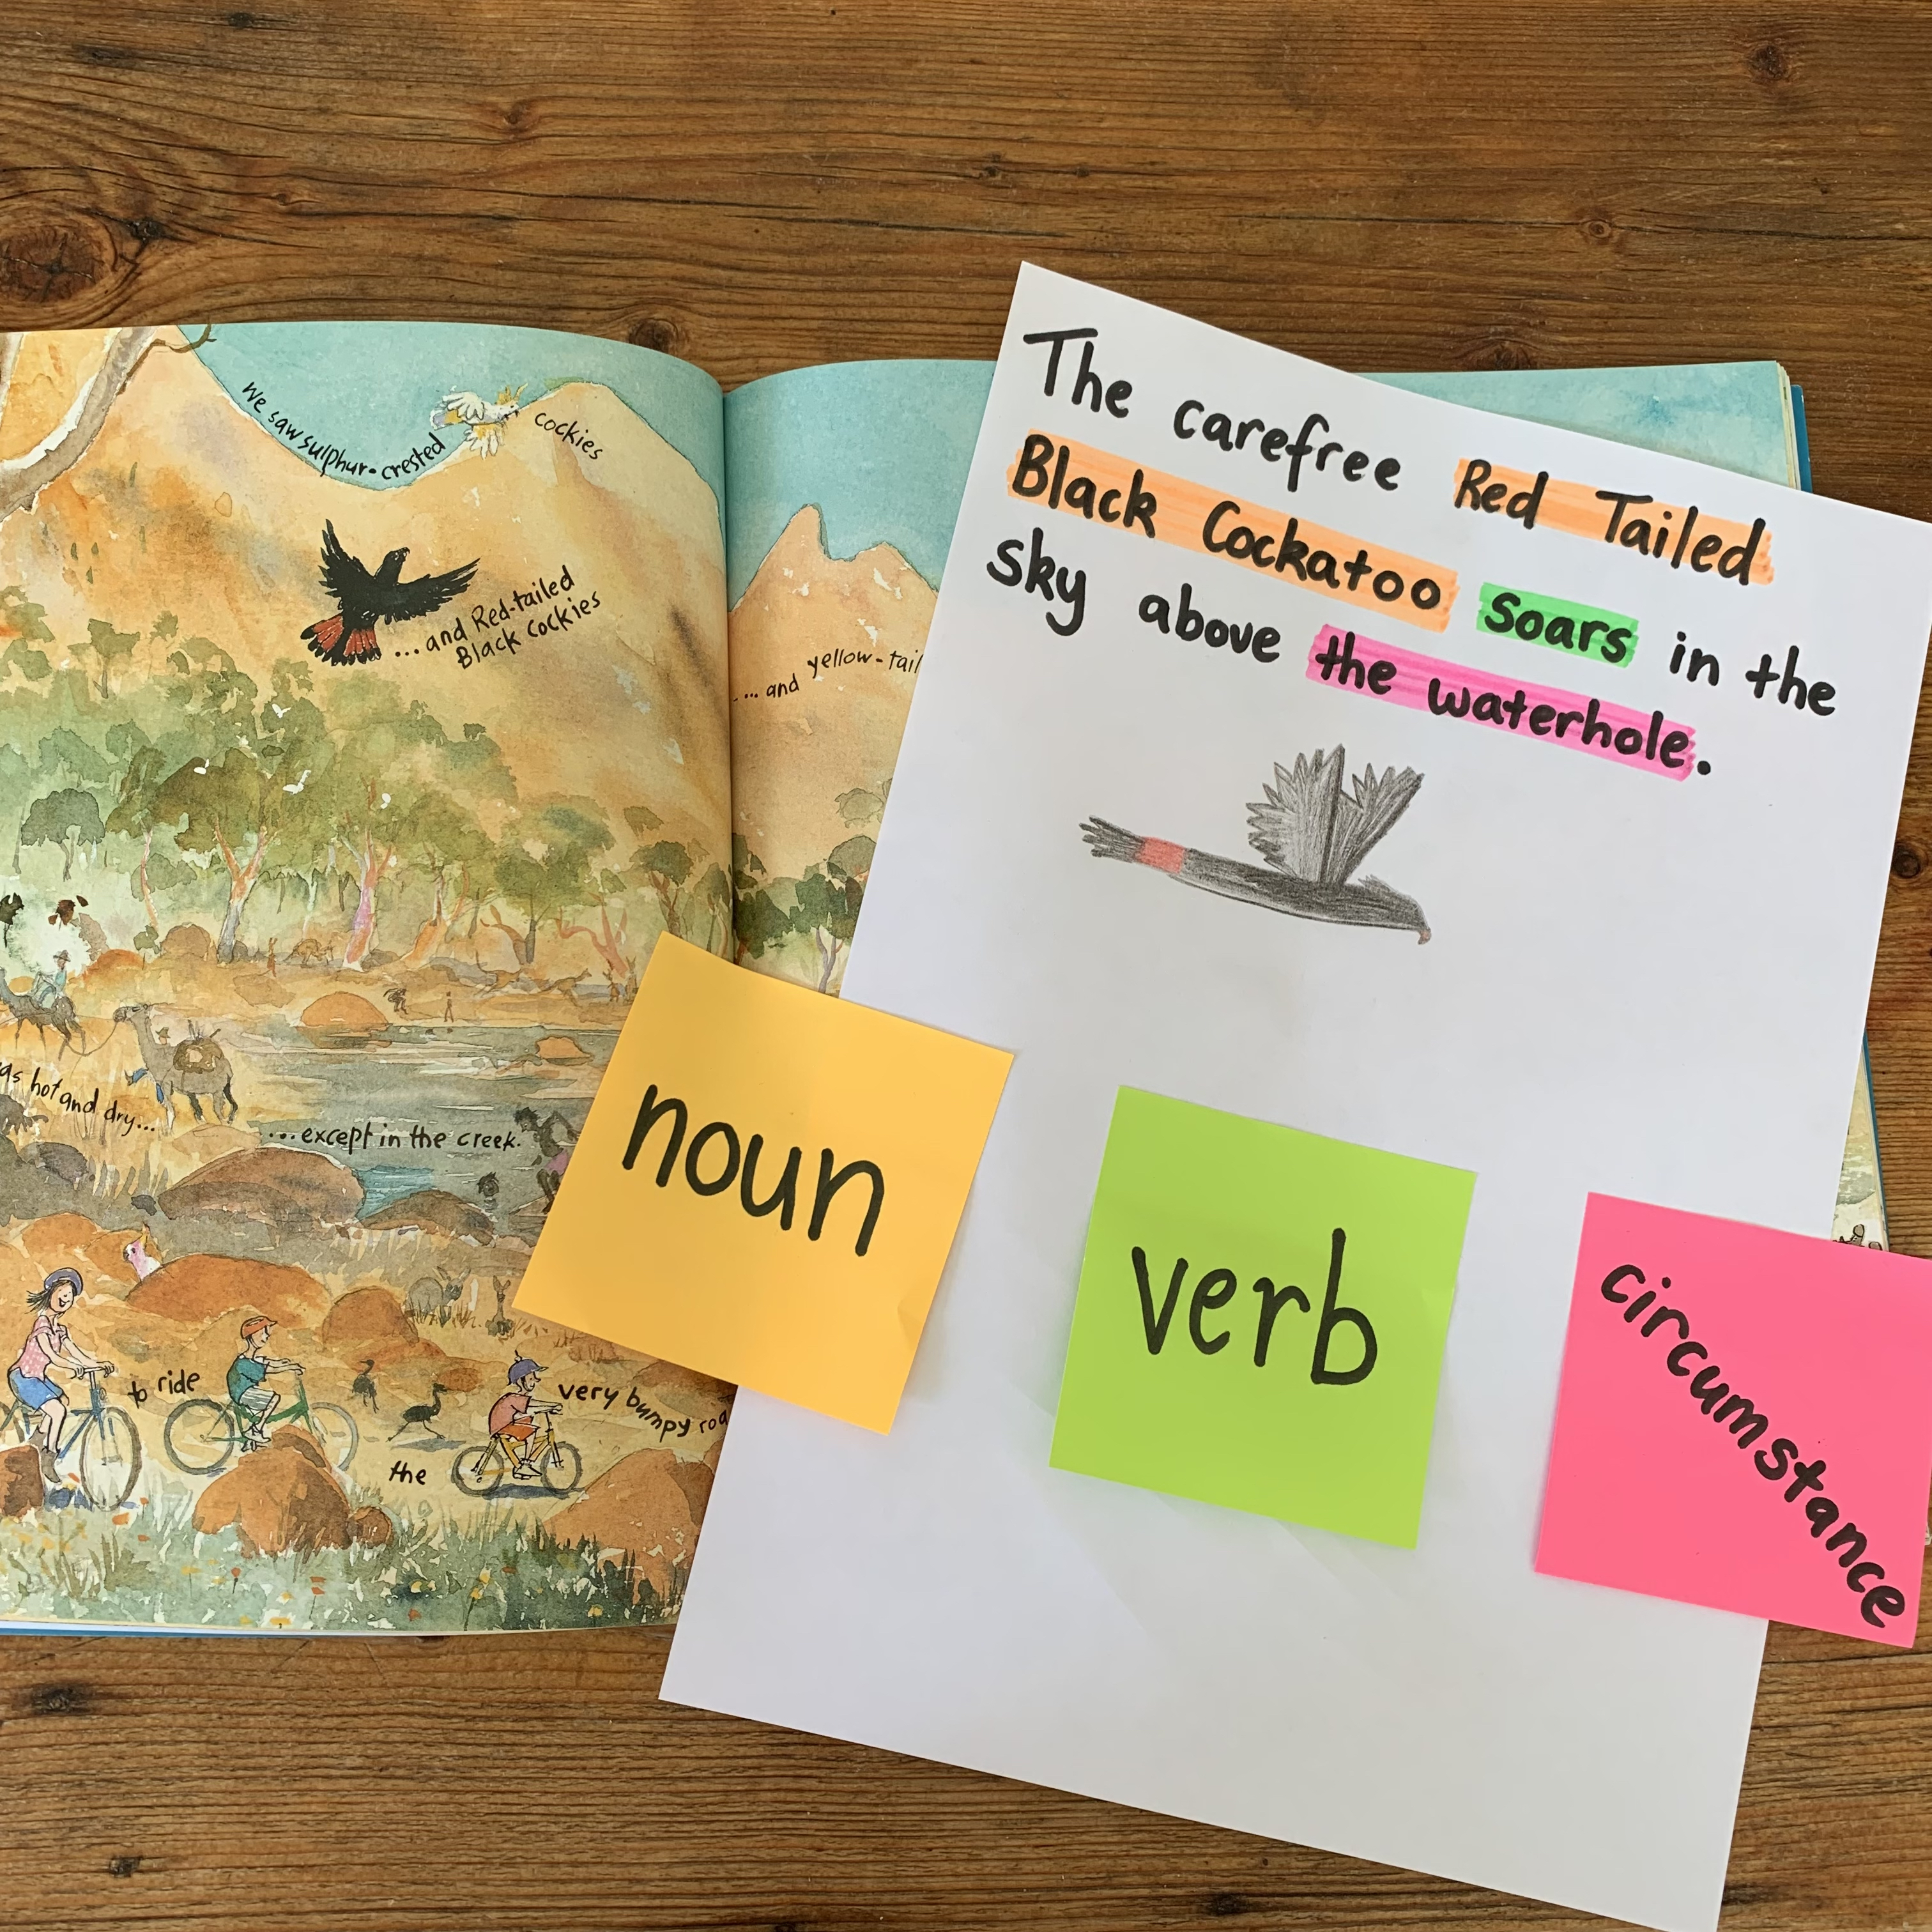 A fun reading lesson for grade 1 and 2 students to think critically and creatively when writing a sentence. This Vocabulary lesson will help students understand how they can use the sentence structure of ‘noun, verb and circumstance’ to improve their writing. Through reading and analysing the images within the mentor text ‘To The Top End’ by Roland Harvey, students will begin to utilise strategies to improve their vocabulary through creative thinking.